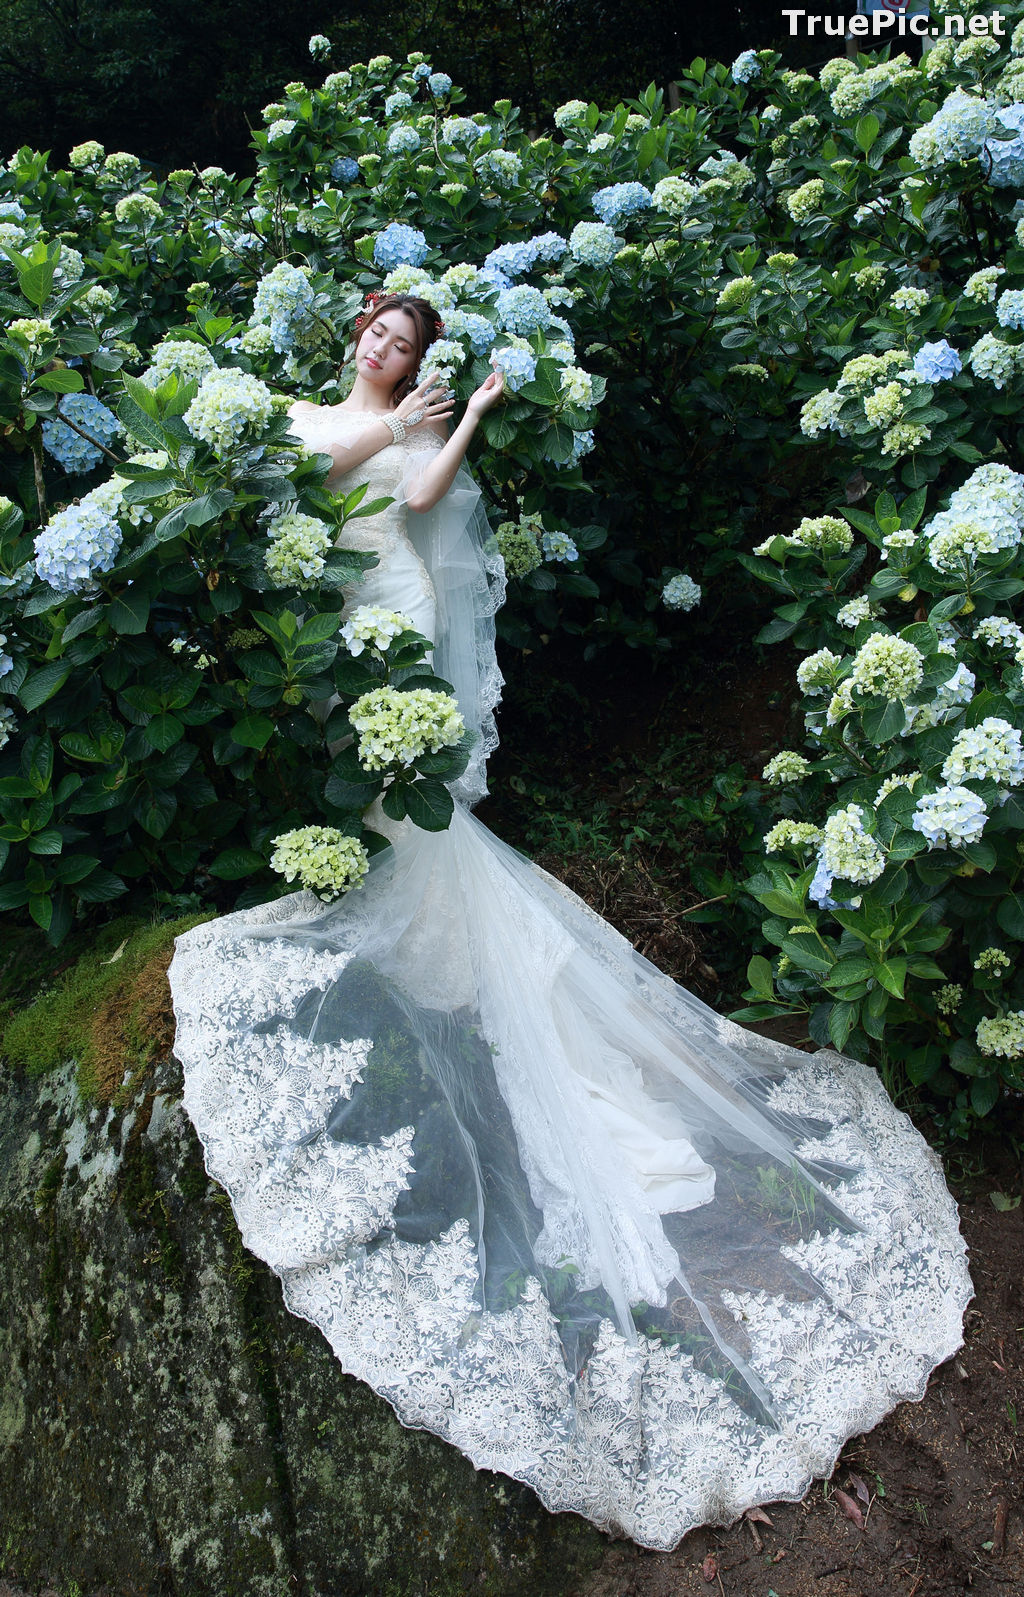 Image Taiwanese Model - 張倫甄 - Beautiful Bride and Hydrangea Flowers - TruePic.net - Picture-45